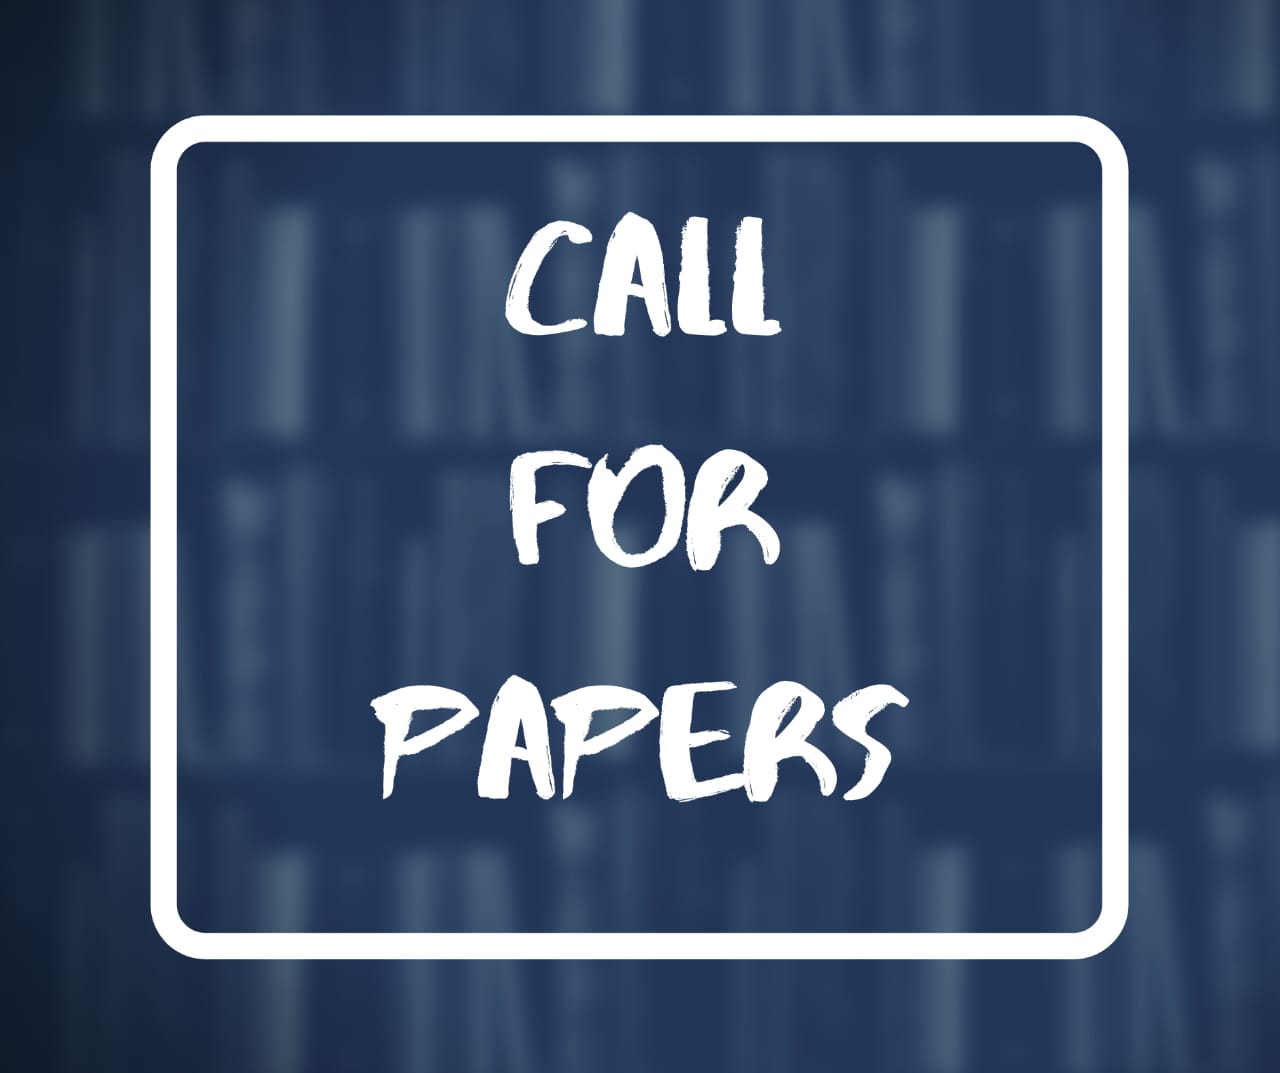 Call for papers | Private and Criminal Law Editions! Catolica Law Review! Submit Now!